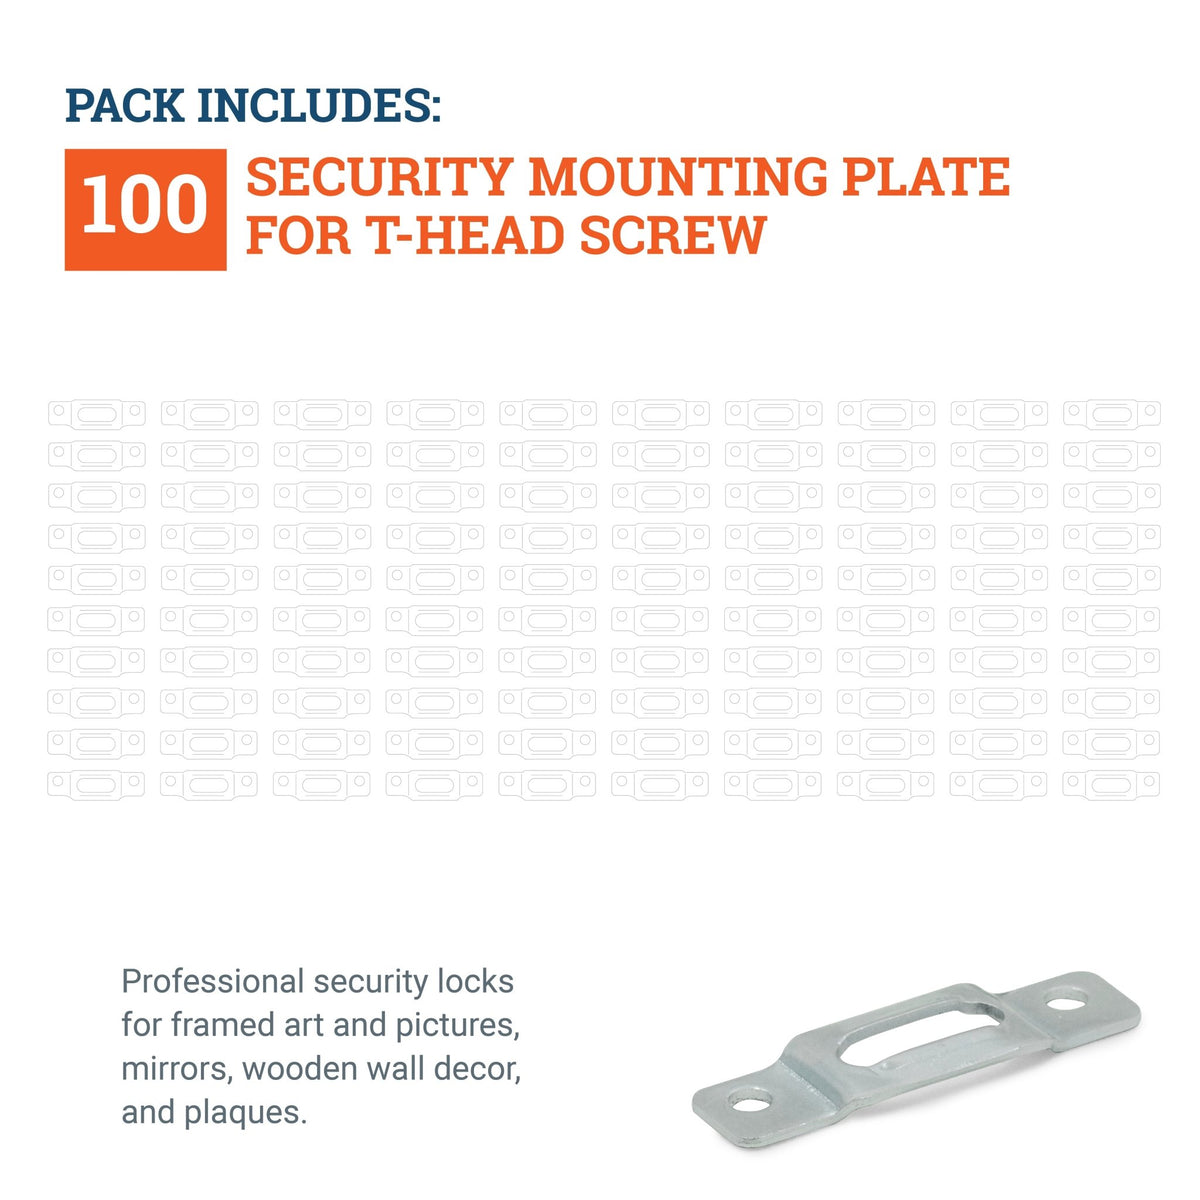 Security Mounting Plate for T-Head Screw - SEC-14C - Picture Hang Solutions